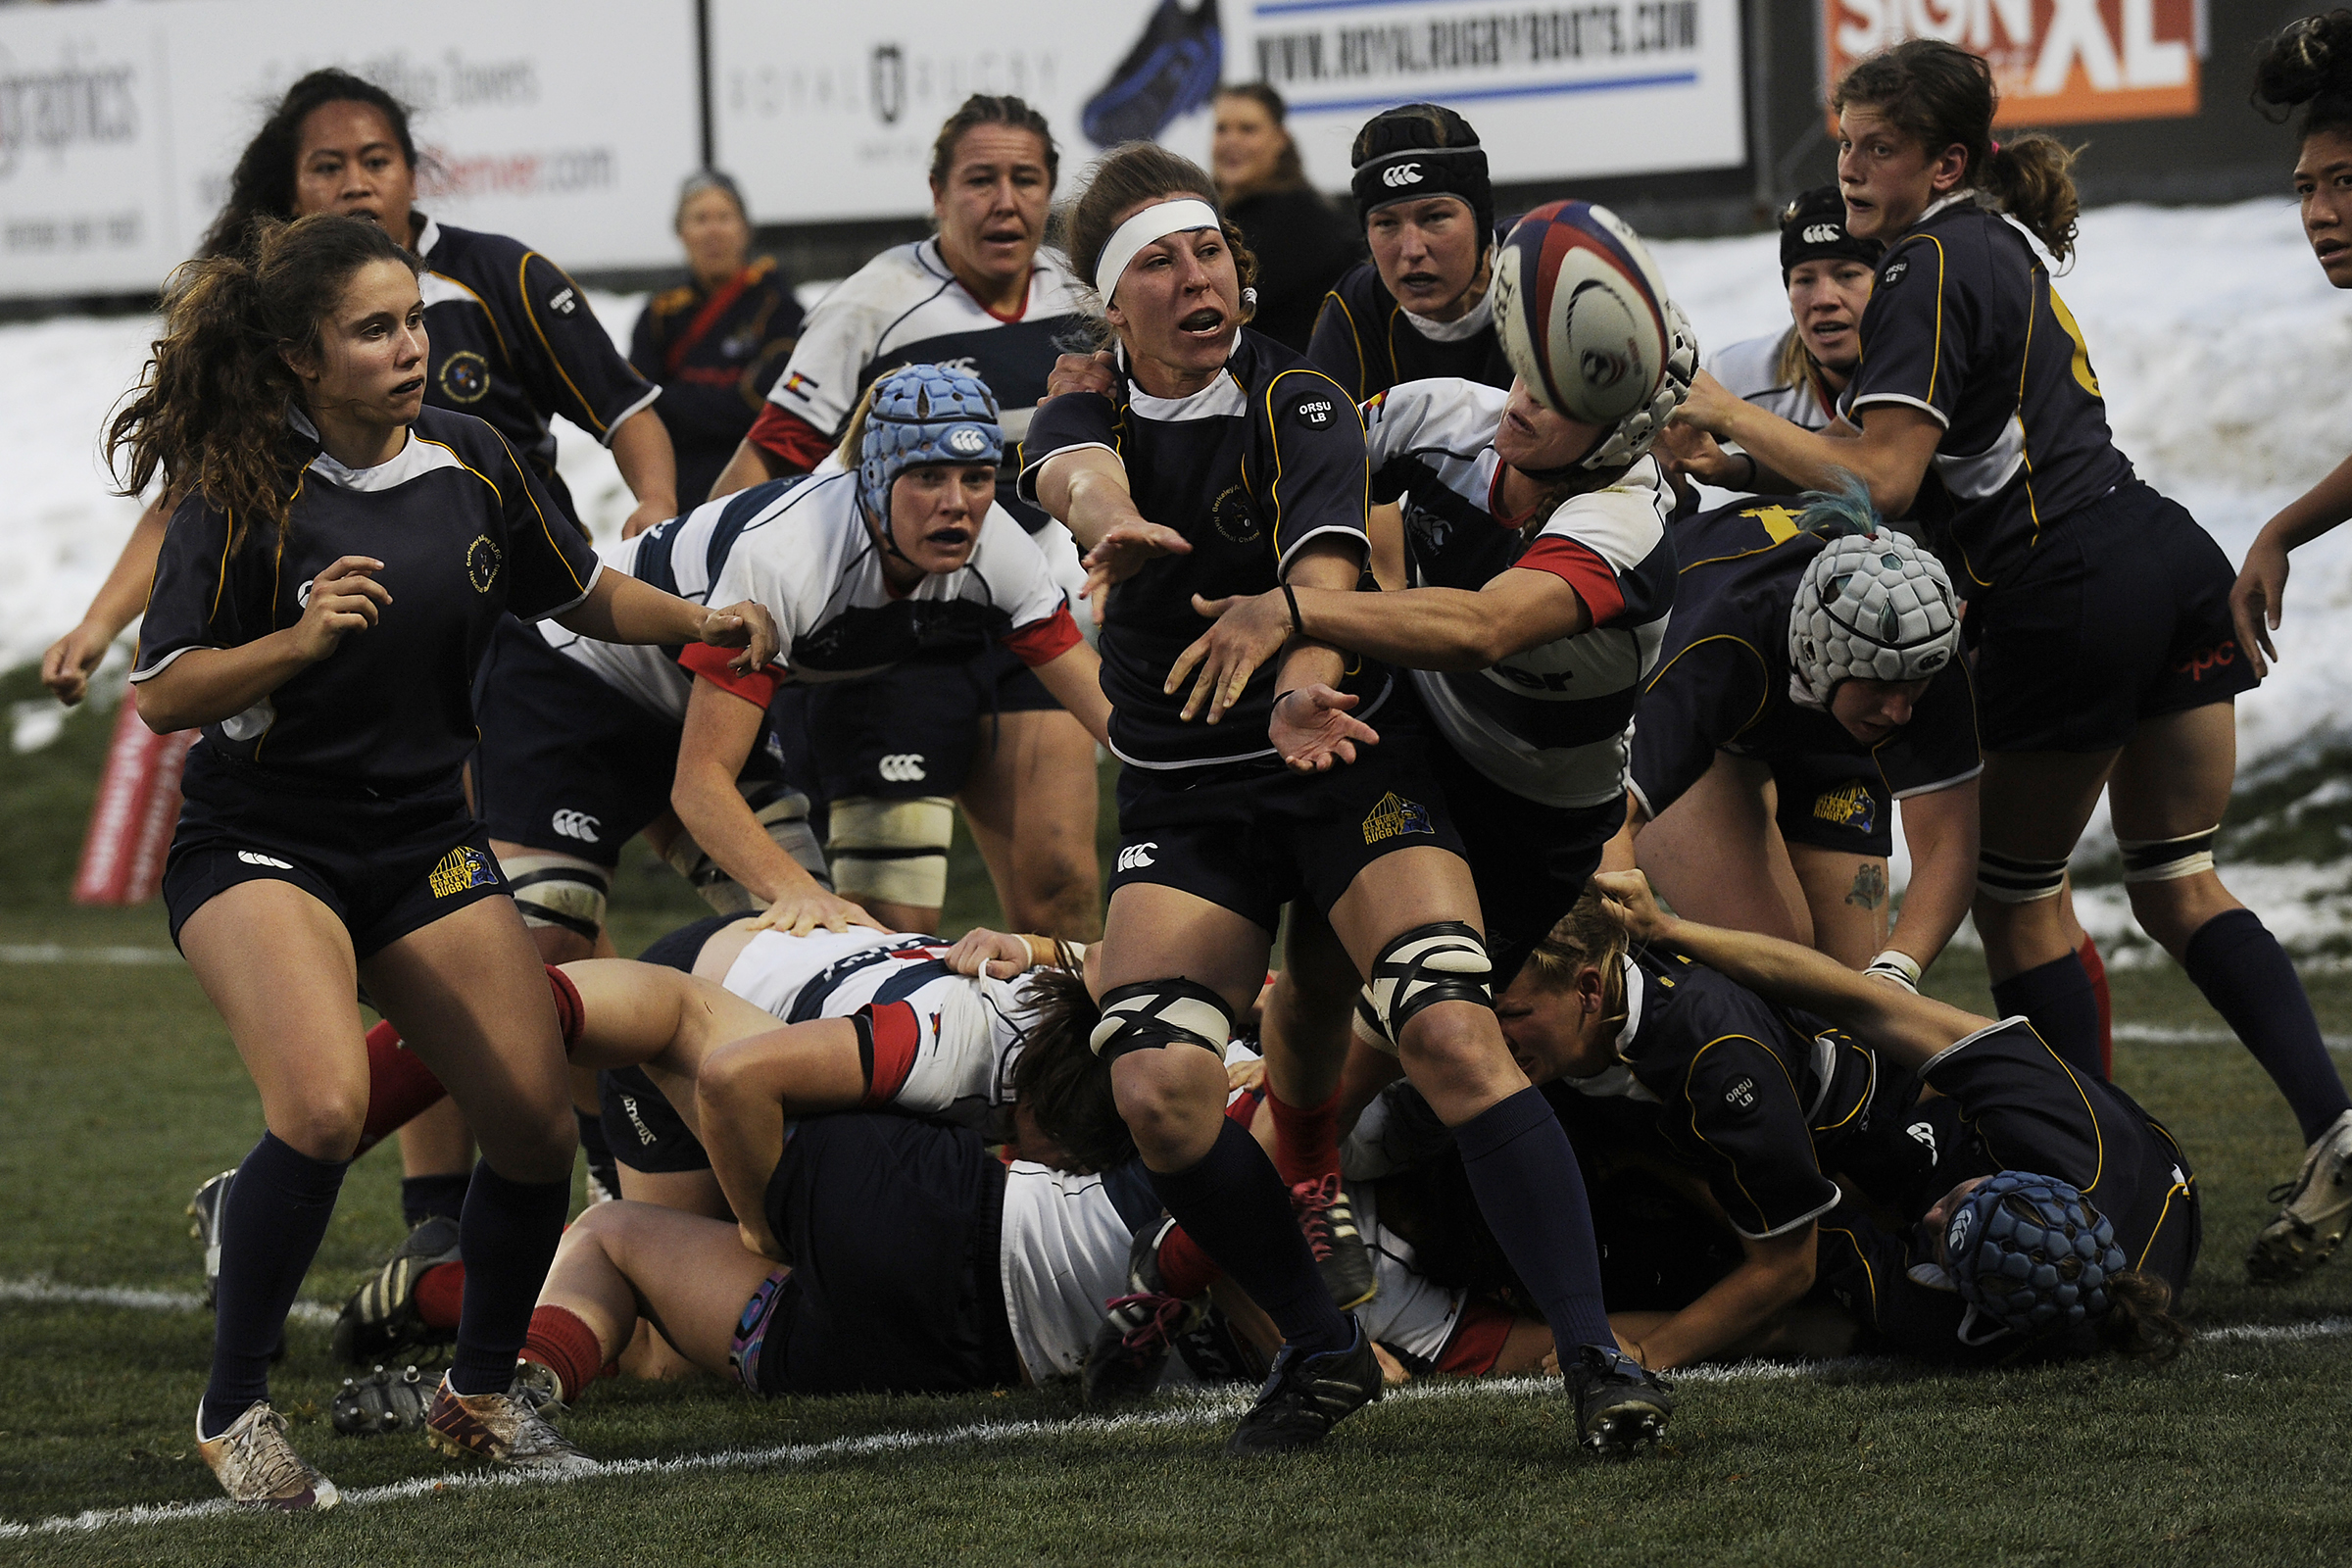 GLENDALE, CO - NOVEMBER 15: Lady Raptors vs New York Rugby Club during the semi-finals at Infinity Park in Glendale, Colorado on November 15, 2015. (Photo by Seth McConnell)